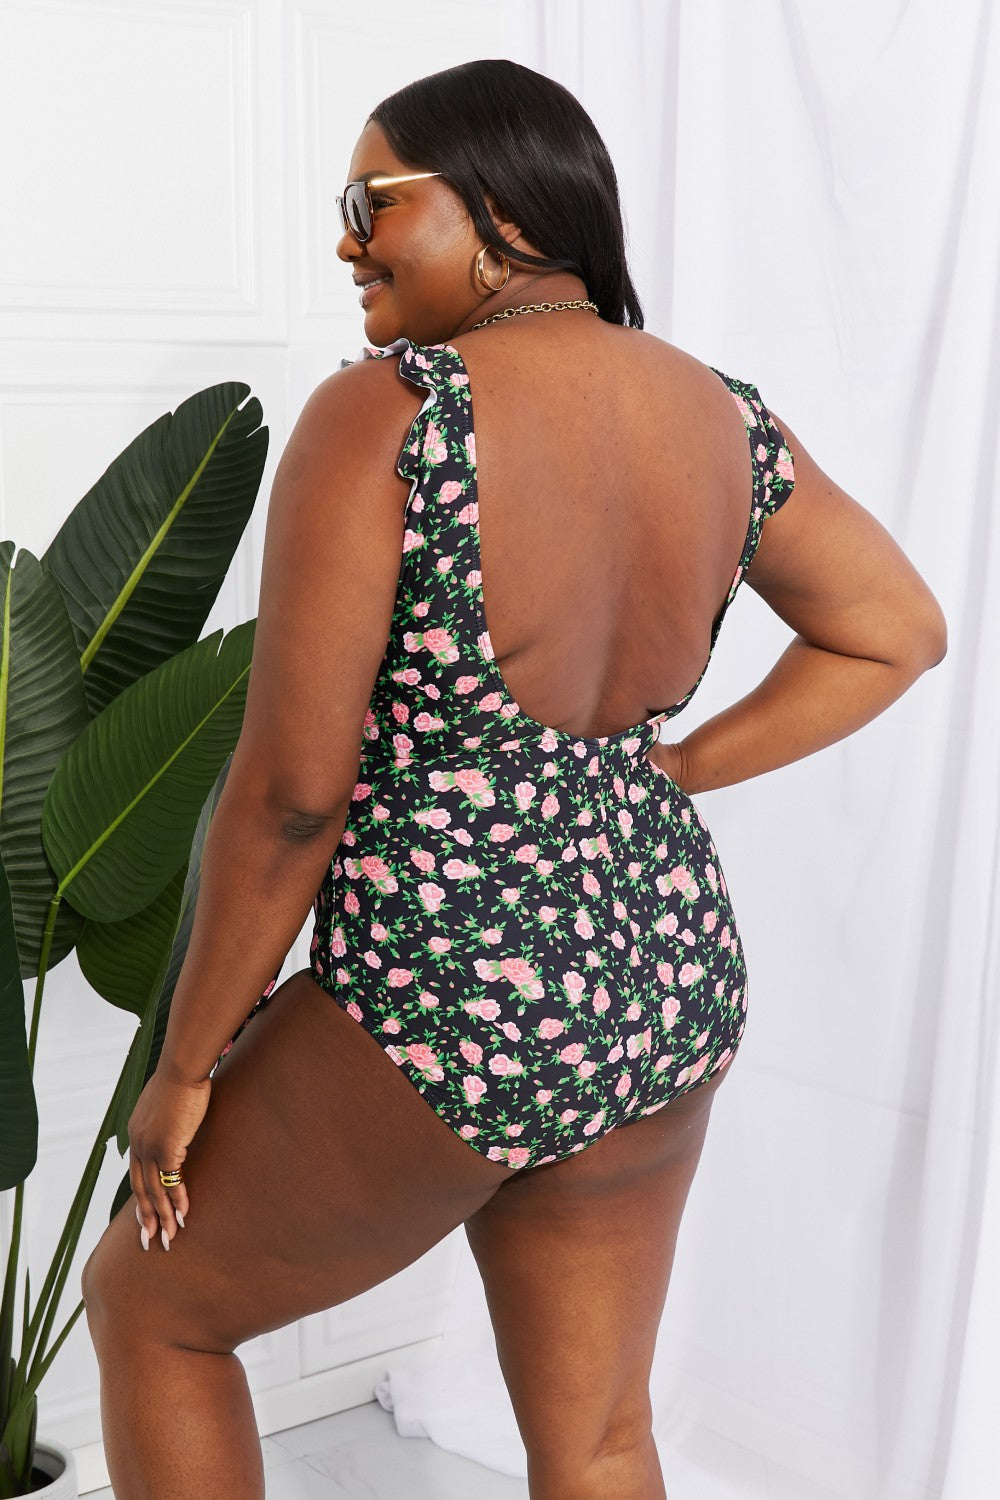 Marina West Swim Full Size Float On Ruffle Faux Wrap One-Piece in Floral - The Fashion Unicorn